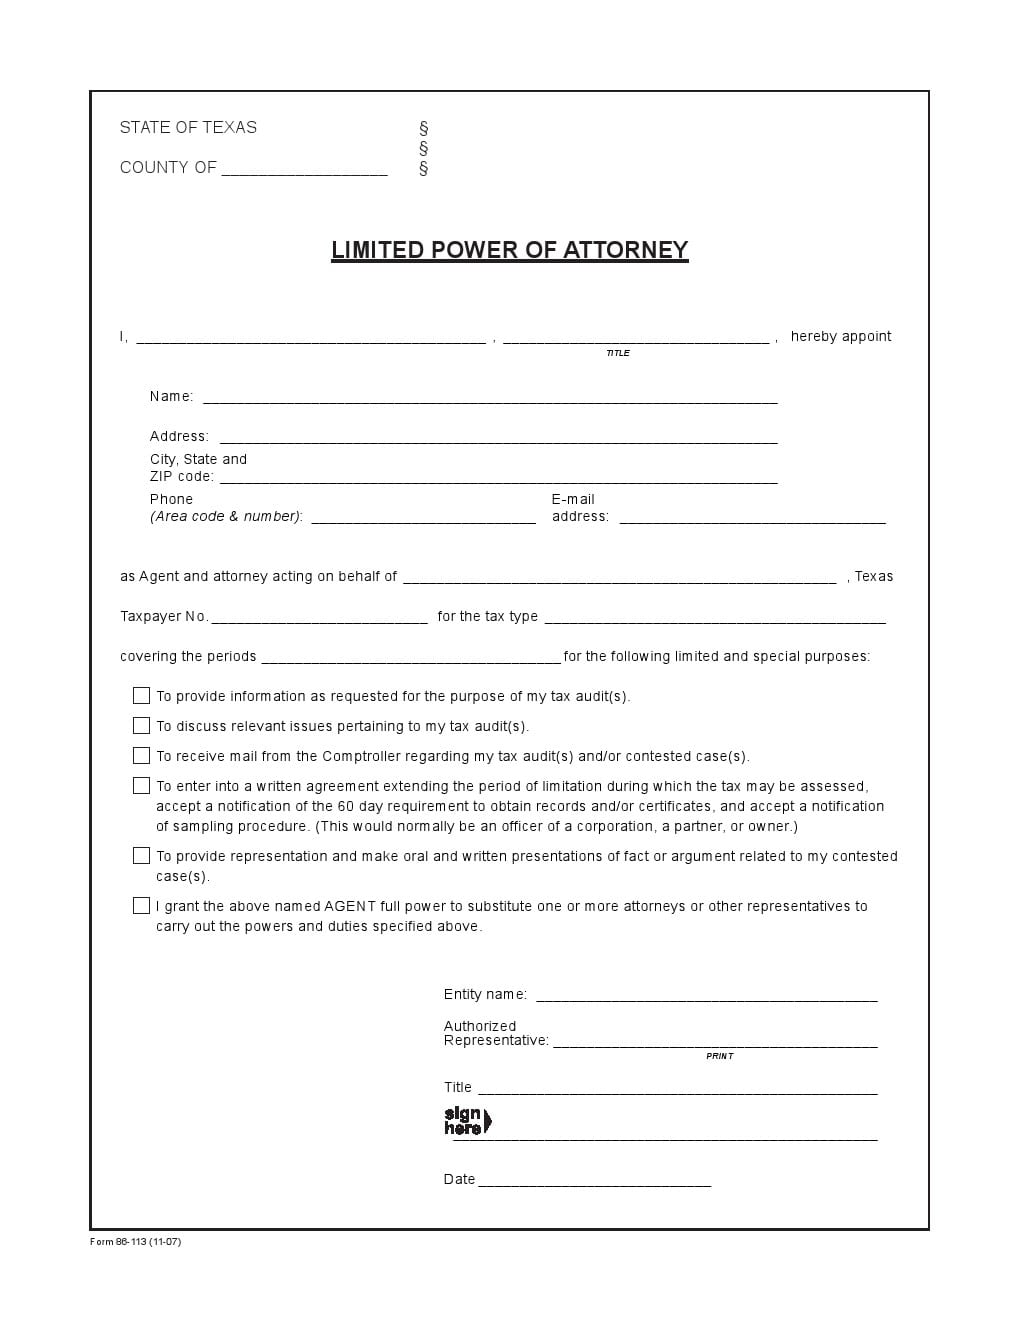 free-texas-limited-power-of-attorney-form-for-tax-audits-adobe-pdf-word